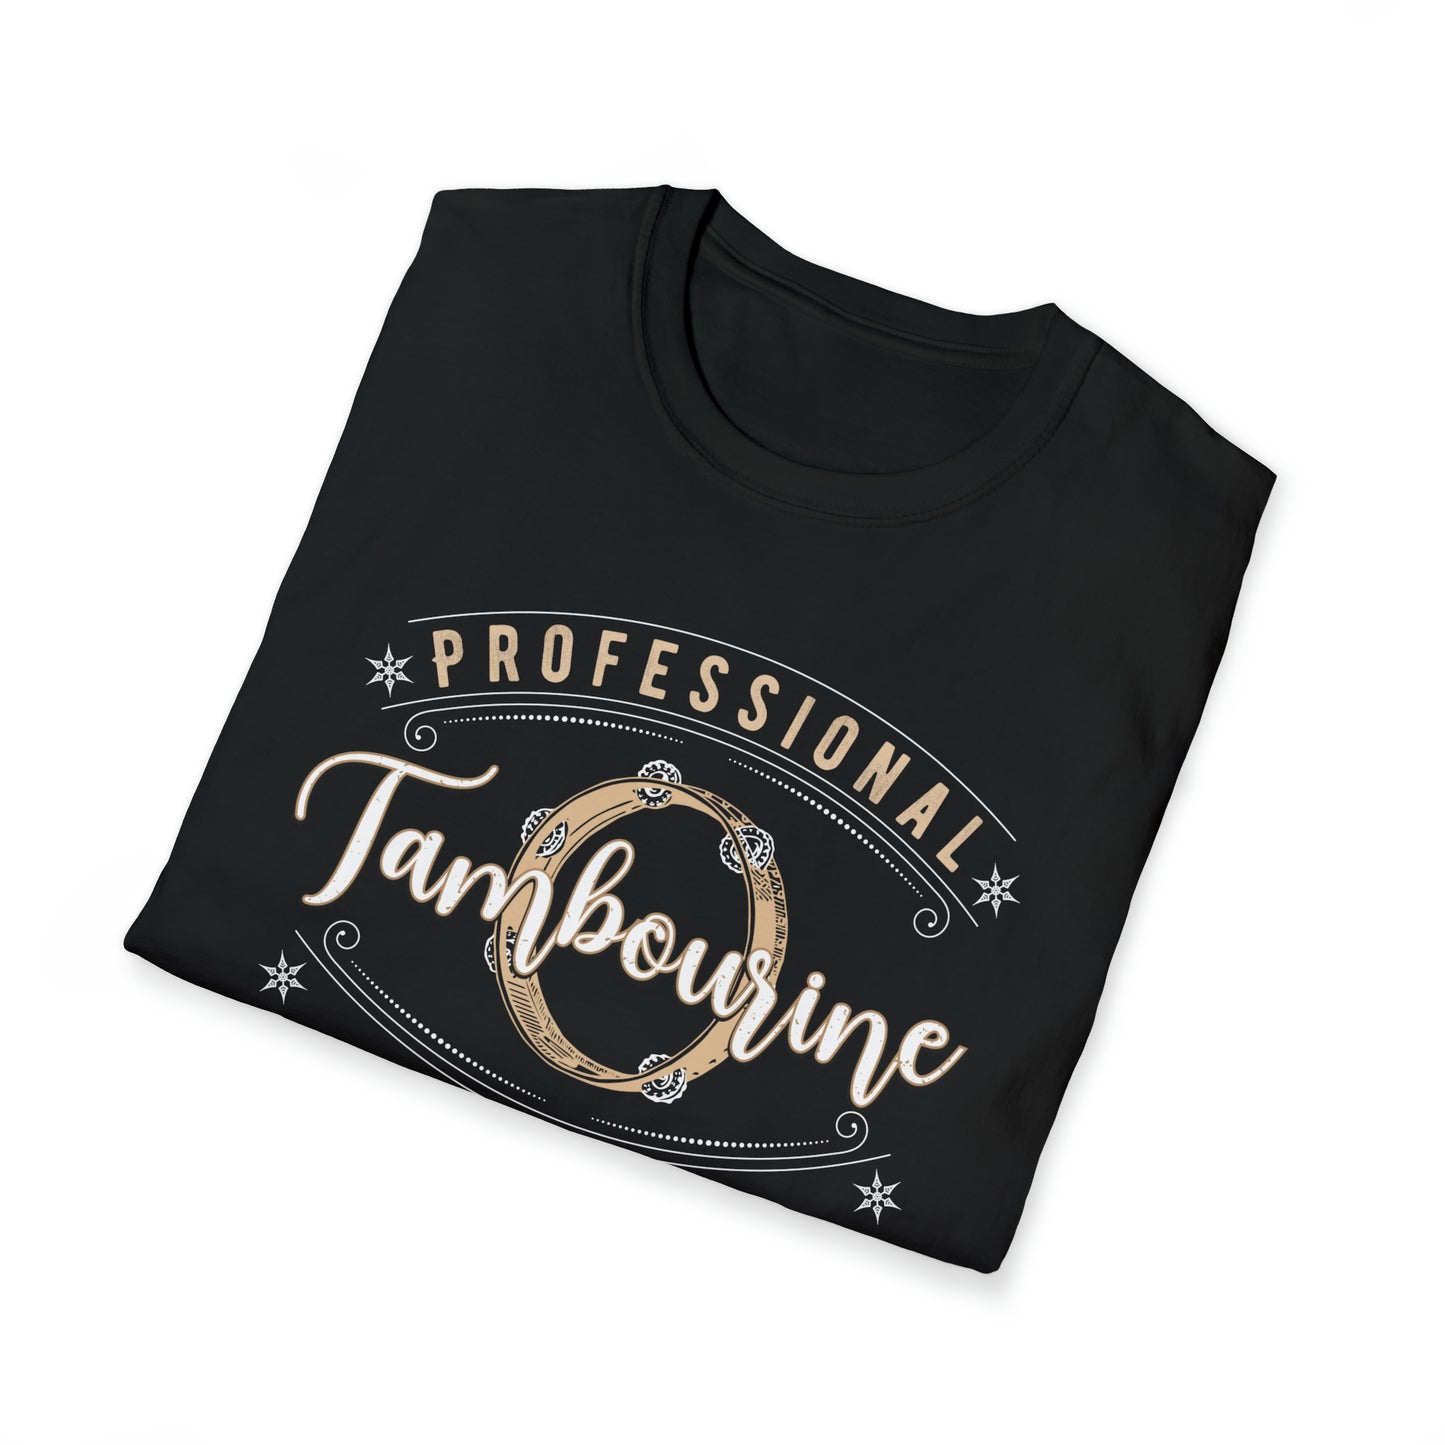 Professional Tambourine Player, Softstyle Gildan T-Shirt, Unisex, Dark Colors, Music Fan Gift, Musician Gift, Funny Gift for Percussionist